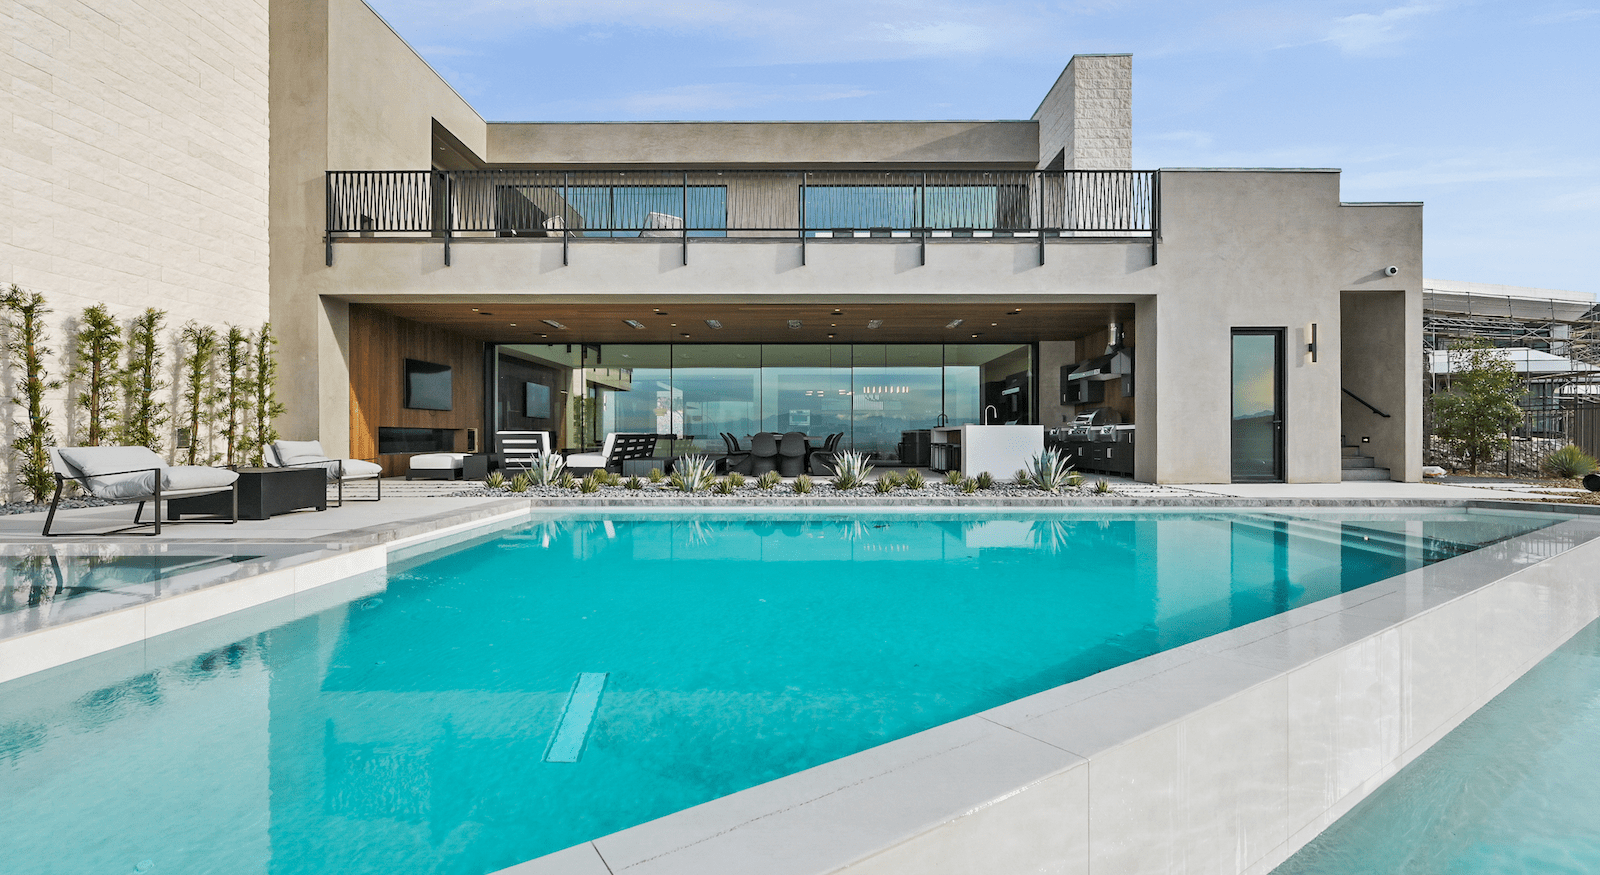 Pool and outdoor living at The New American Home 2023